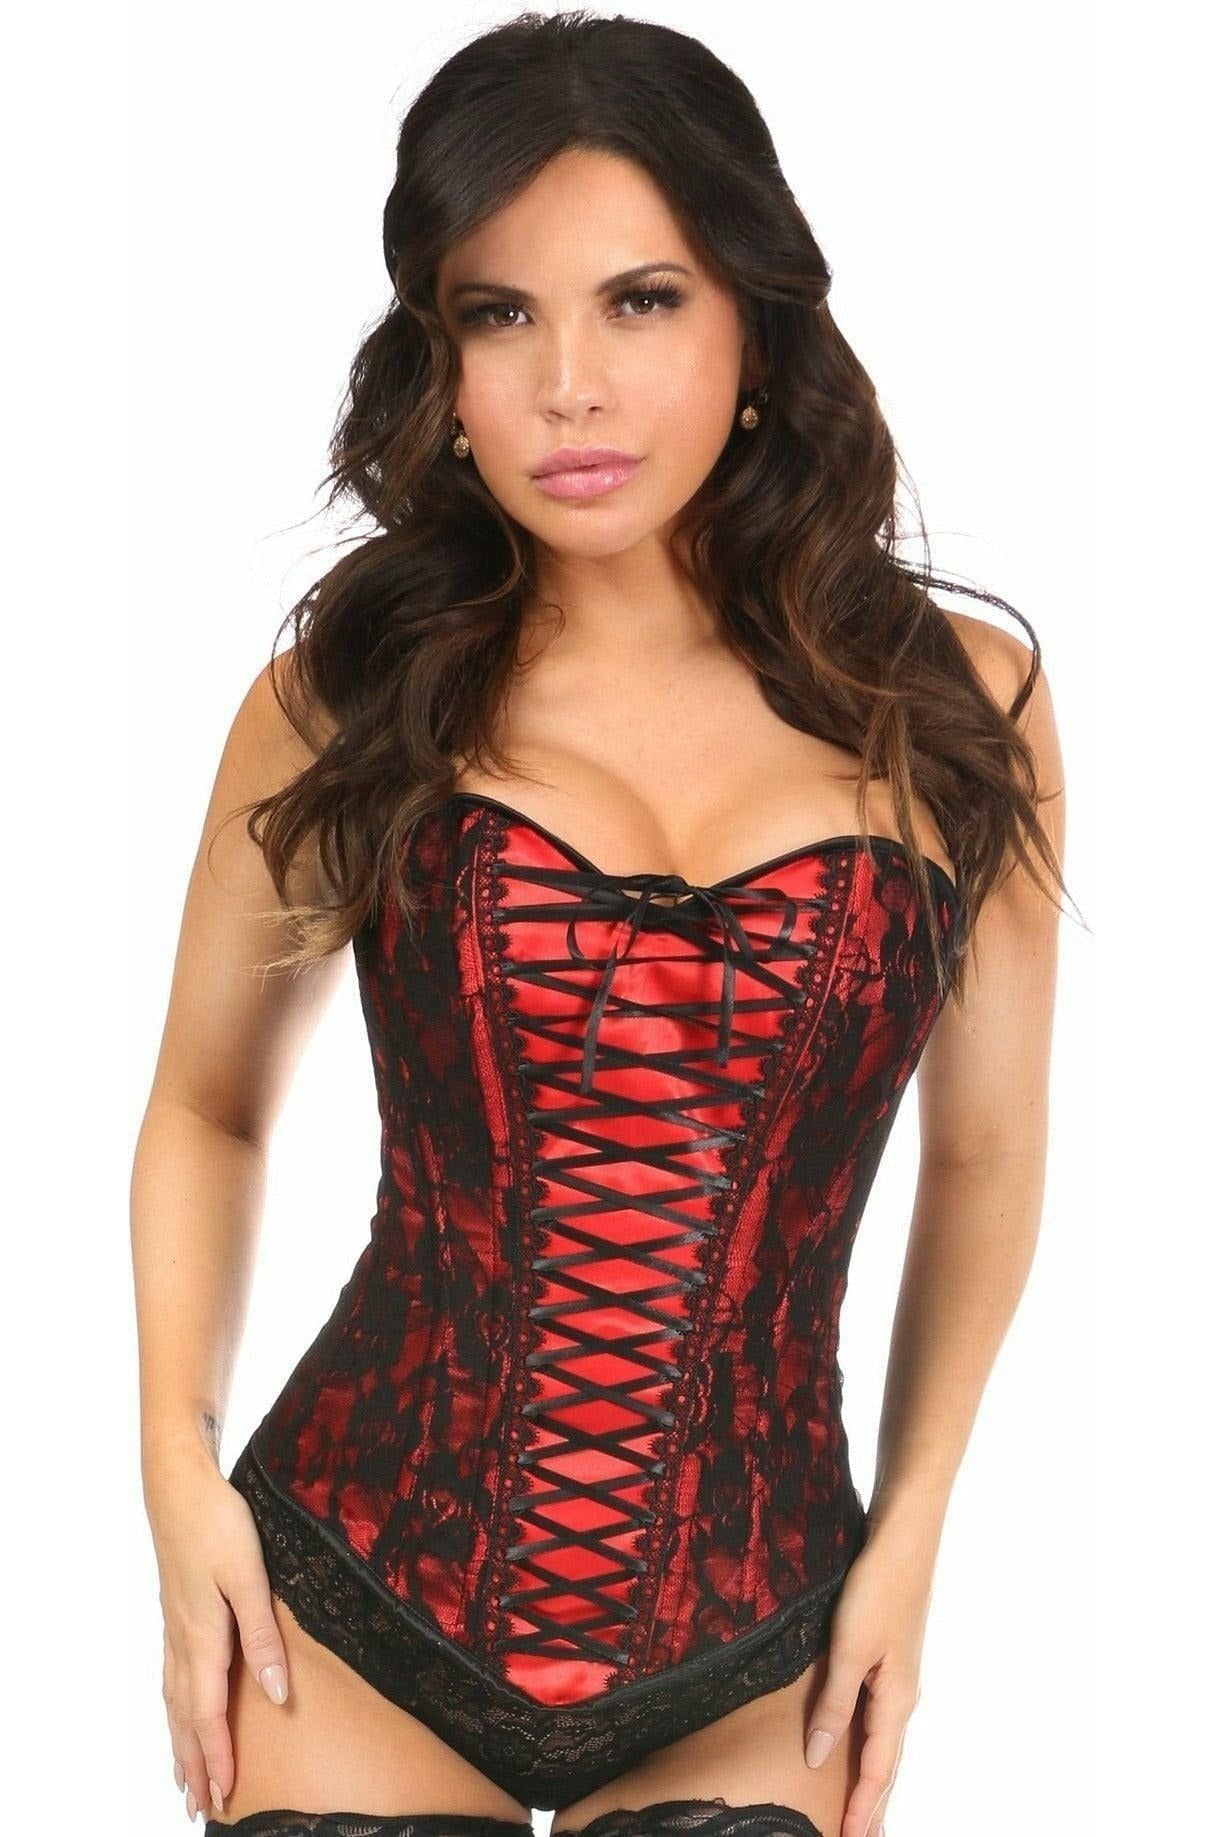 Red Overbust Corset Dress with Black Lace Overlay | lacedupcorsets